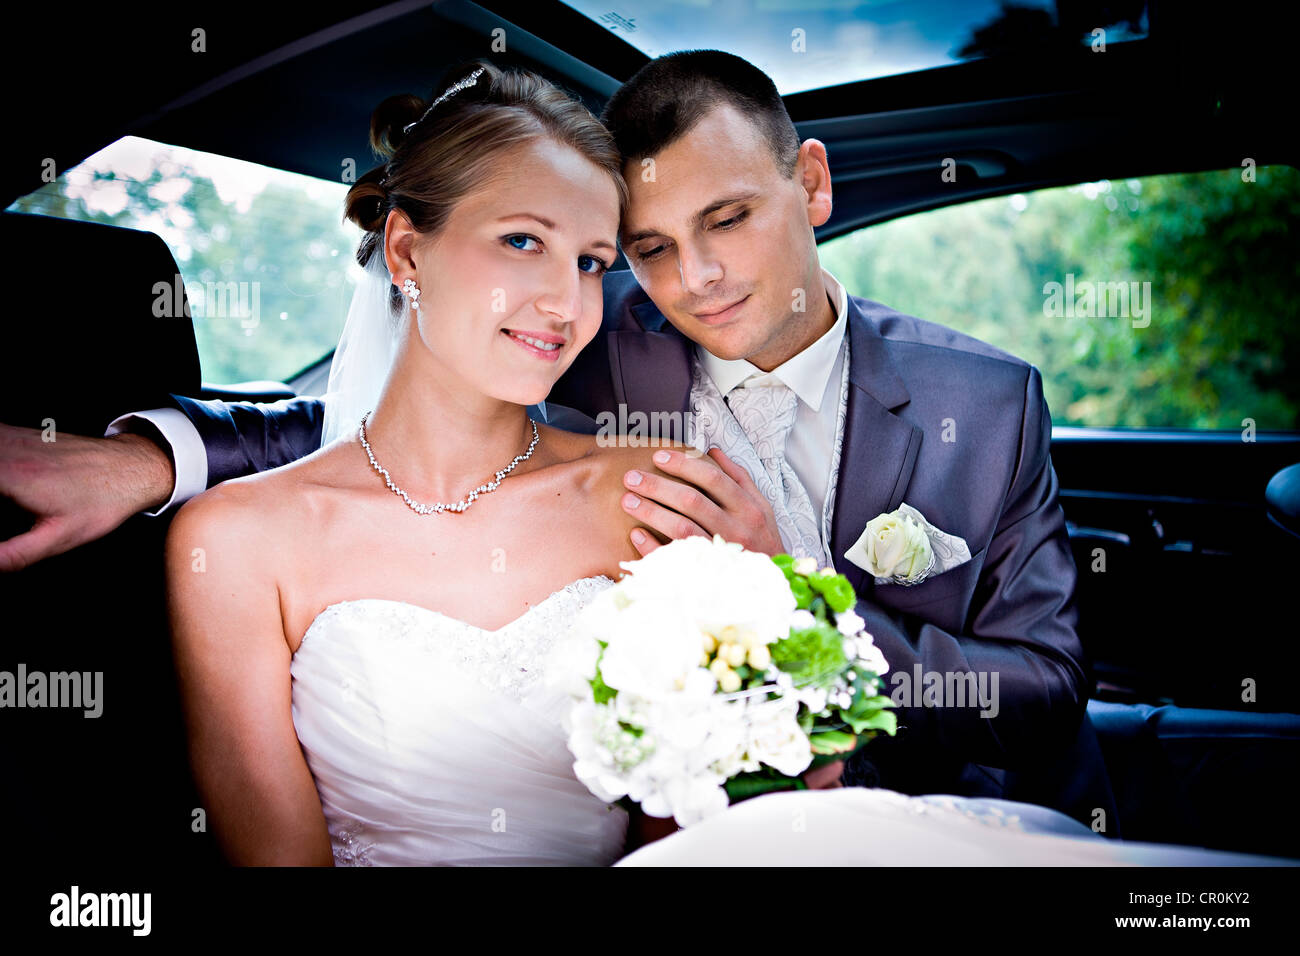 Young bridal couple in a car Stock Photo